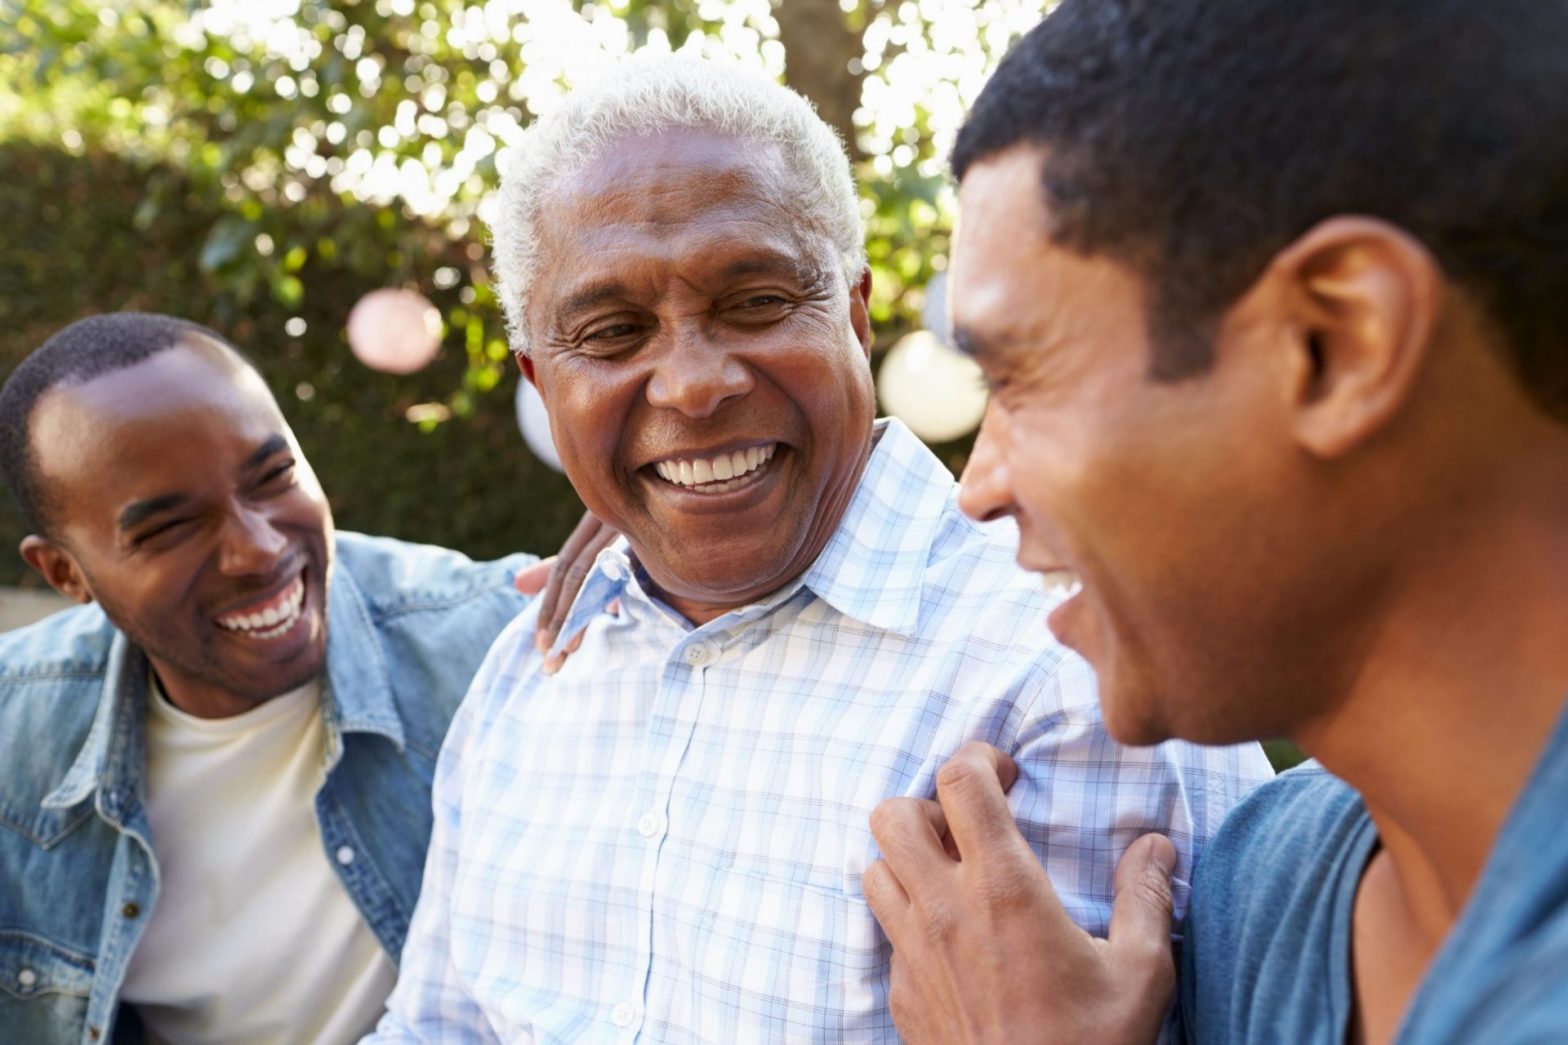 Three men from different generations smiling and laughing together outdoors.